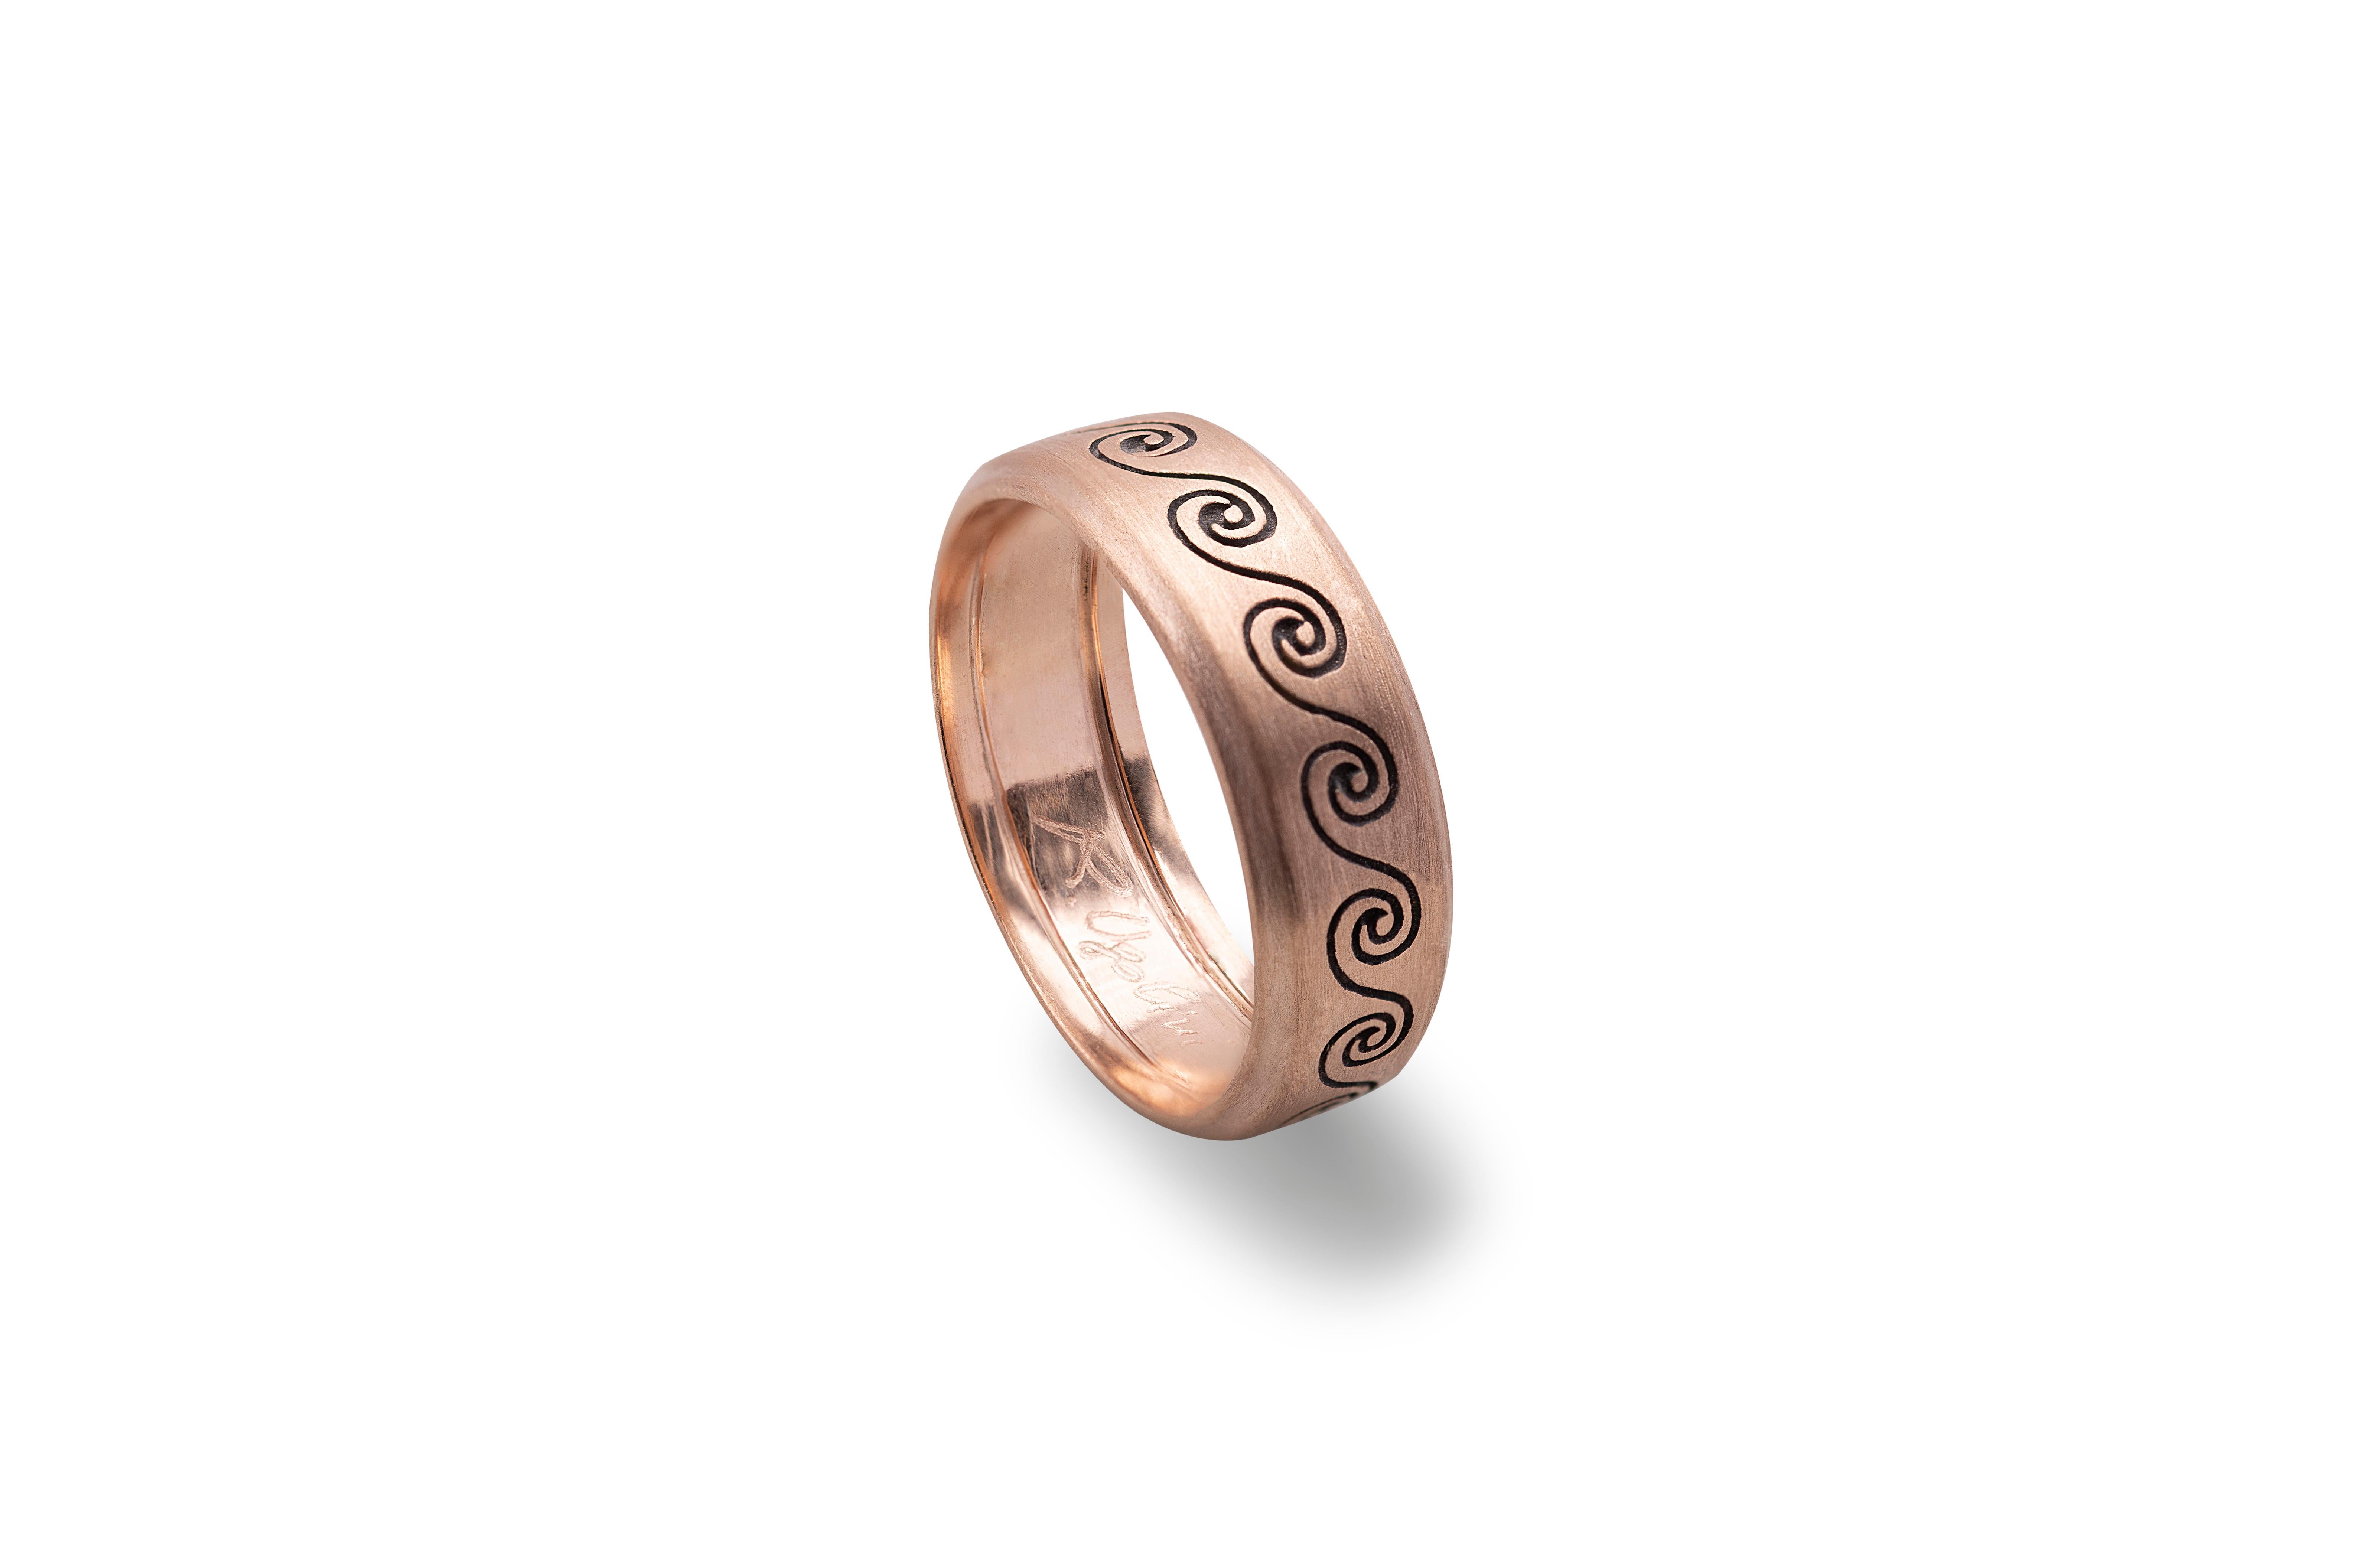 Handcrafted Satin 18 Karats Rose Gold Wave Unisex Design Ring 
Here there is an amazing design ring, handcrafted in 18 karats rose gold and embellished with a beautiful handgraved wave.
It can be worn for different purposes: as fashion ring that